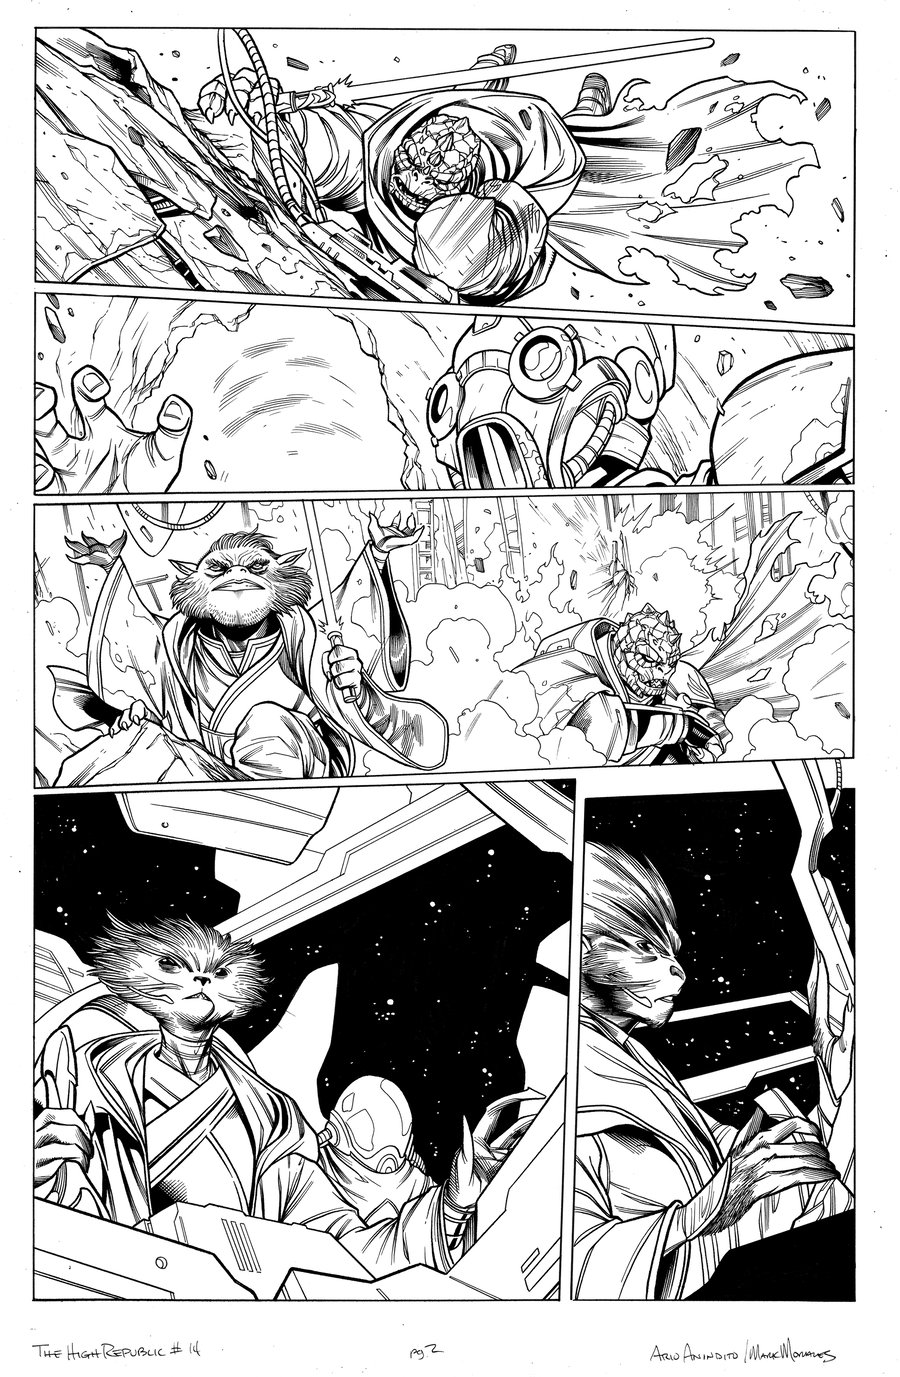 Image of Star Wars: The High Republic #14 PG 2